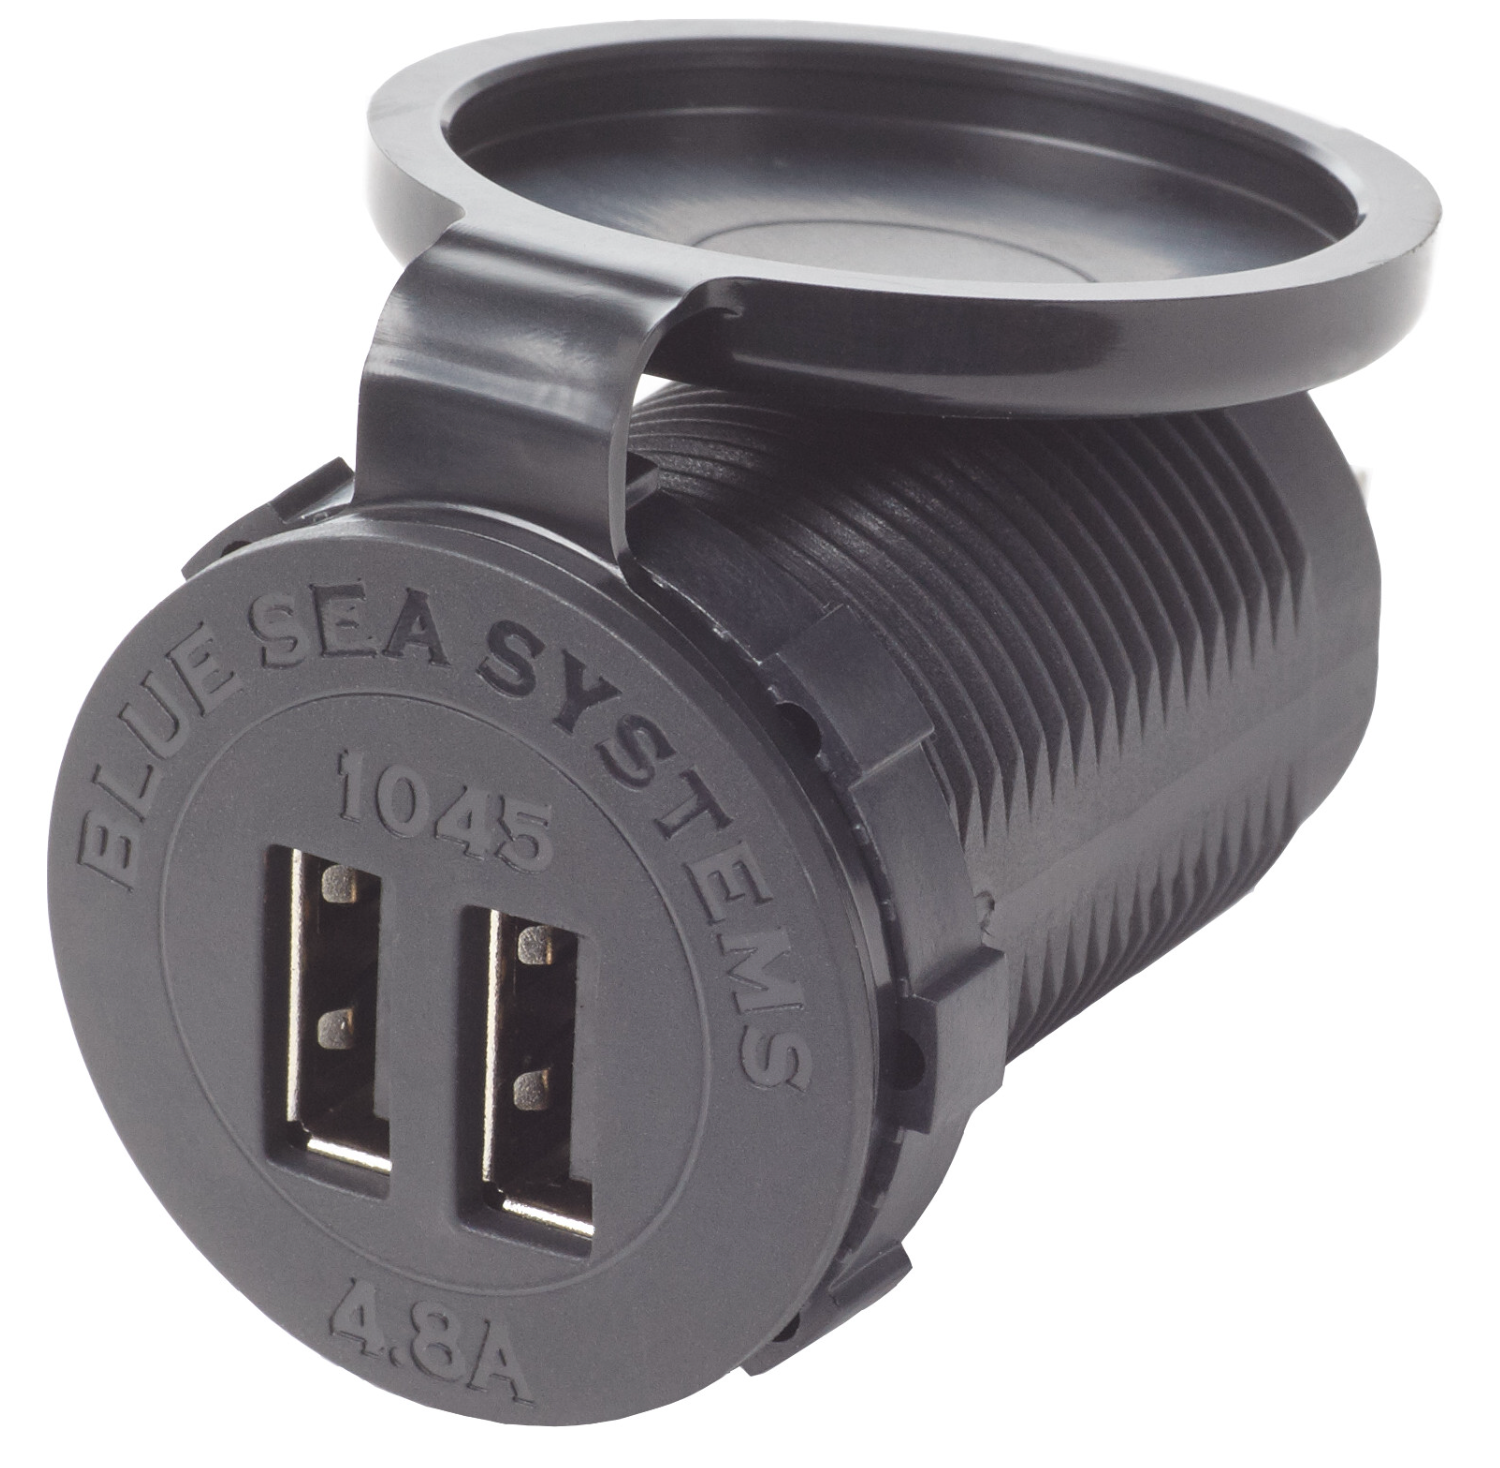 12/24V DC Dual USB Charger 4.8A with Intelligent Device Recognition